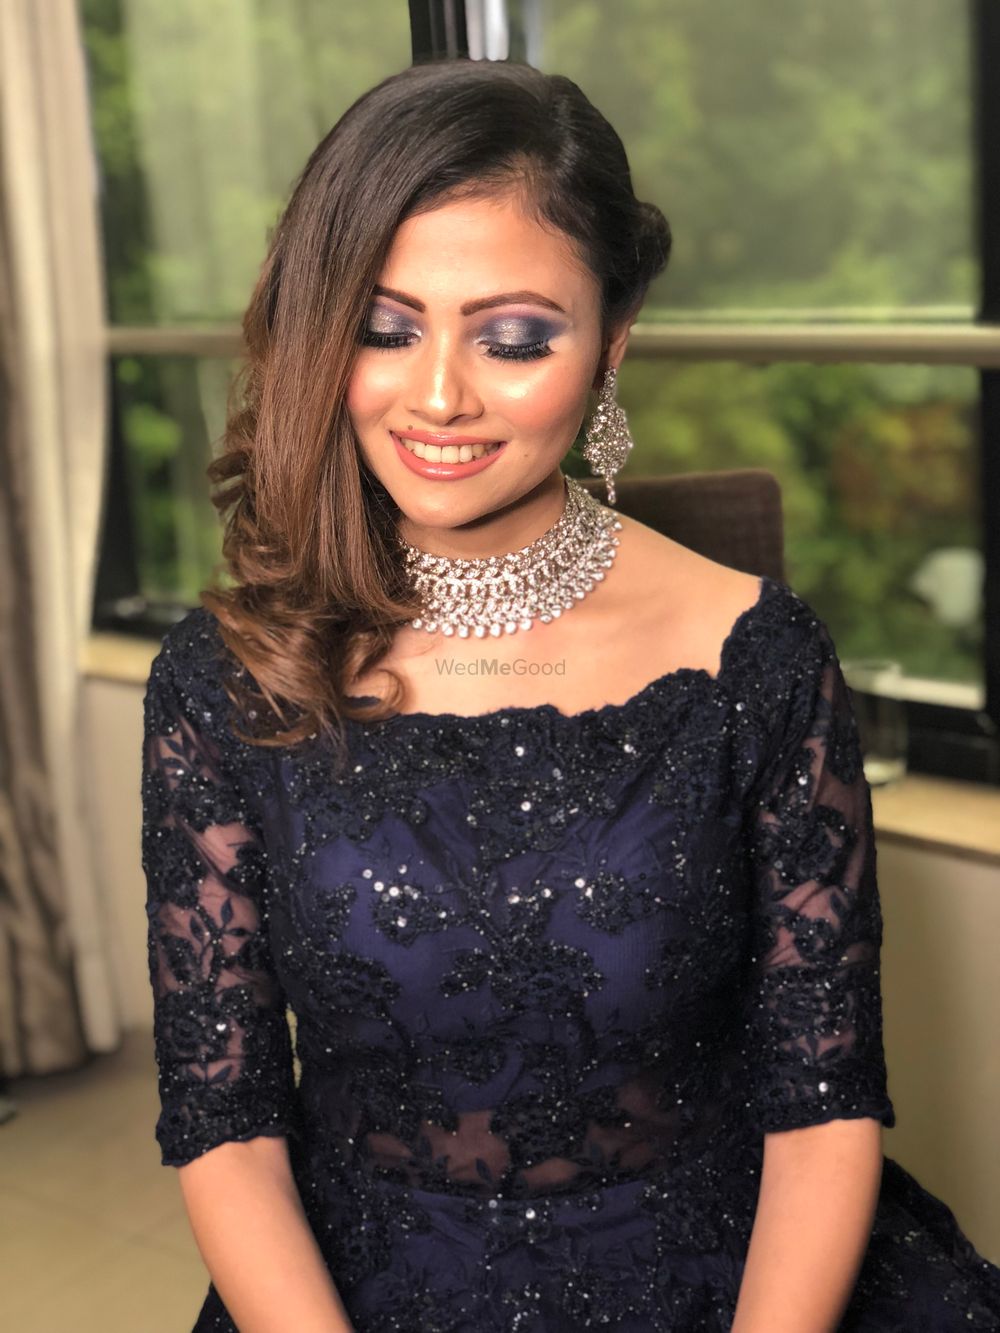 Photo From Niharika's Cocktail + Wedding + Reception - By MakeupbyNitika